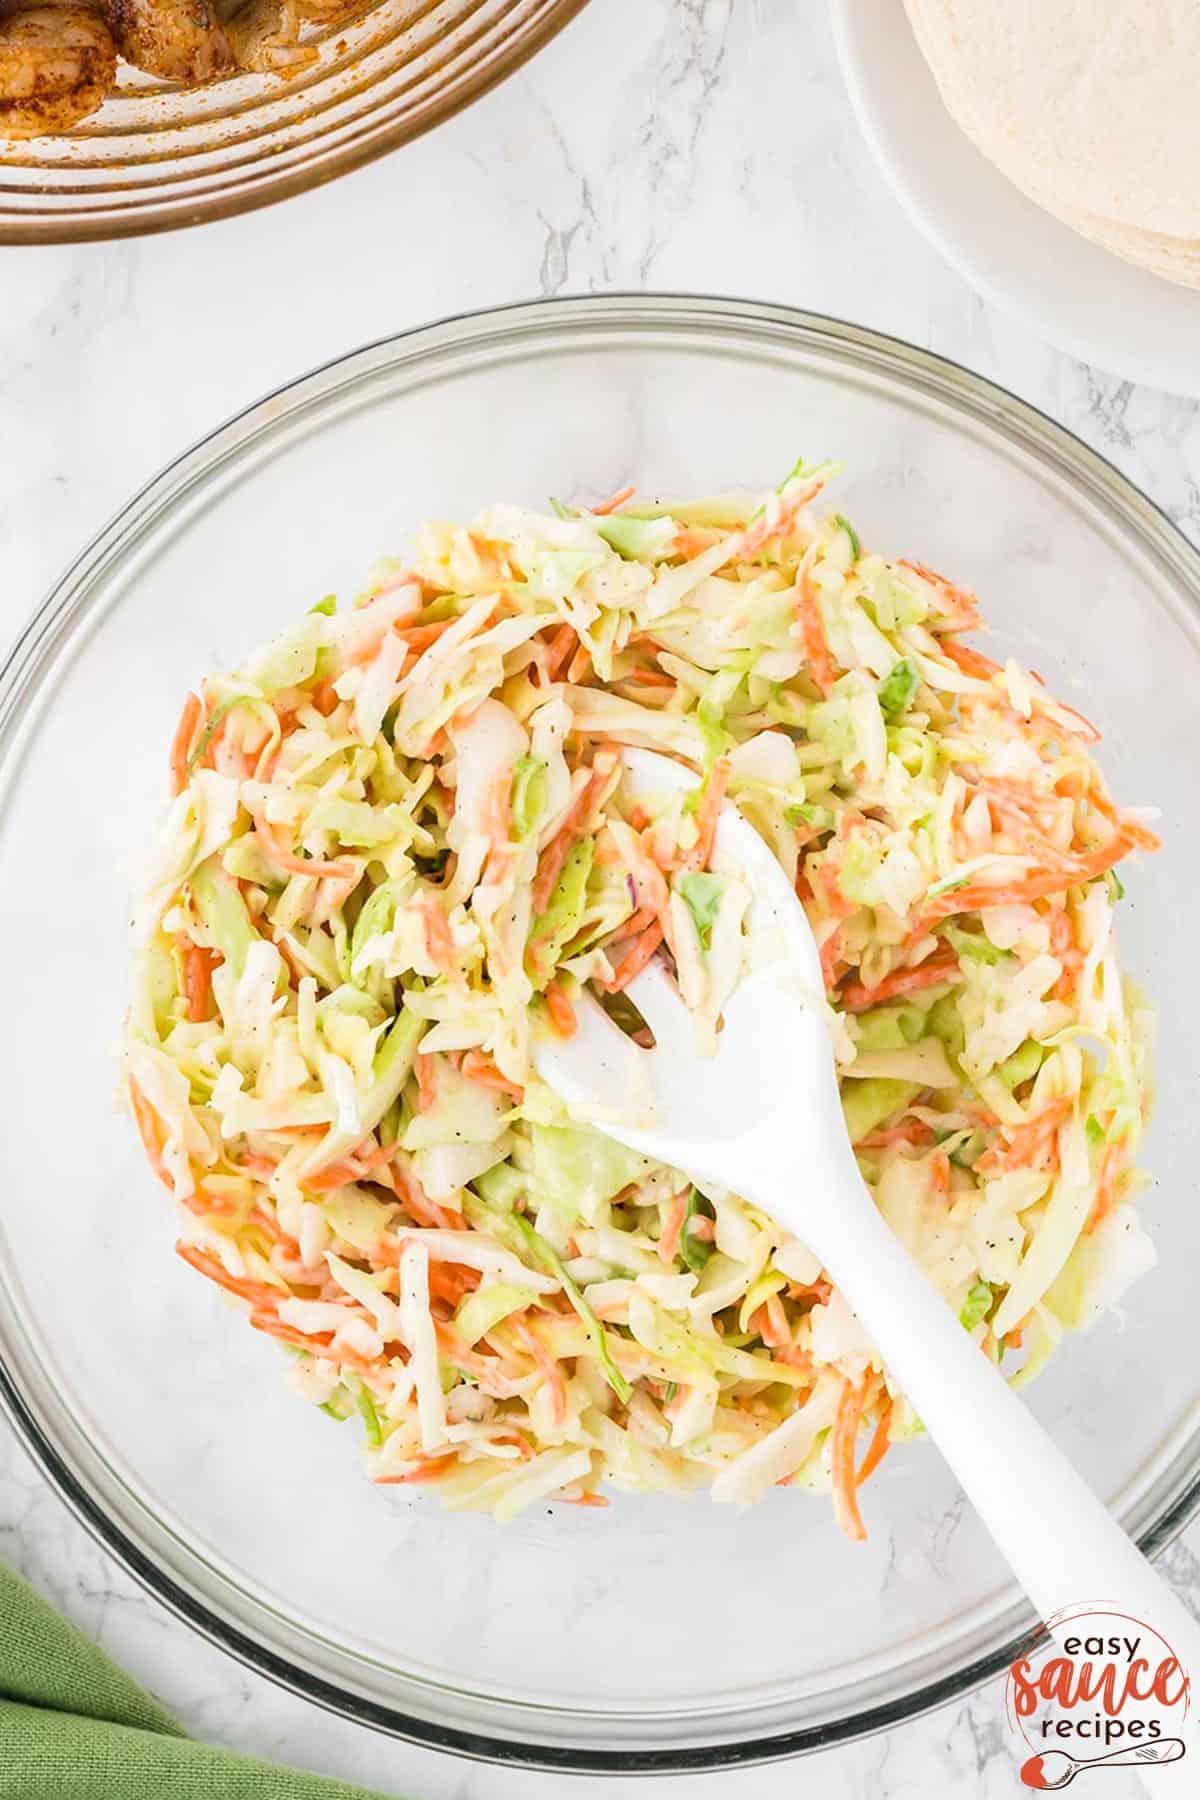 mixed coleslaw in a mixing bowl